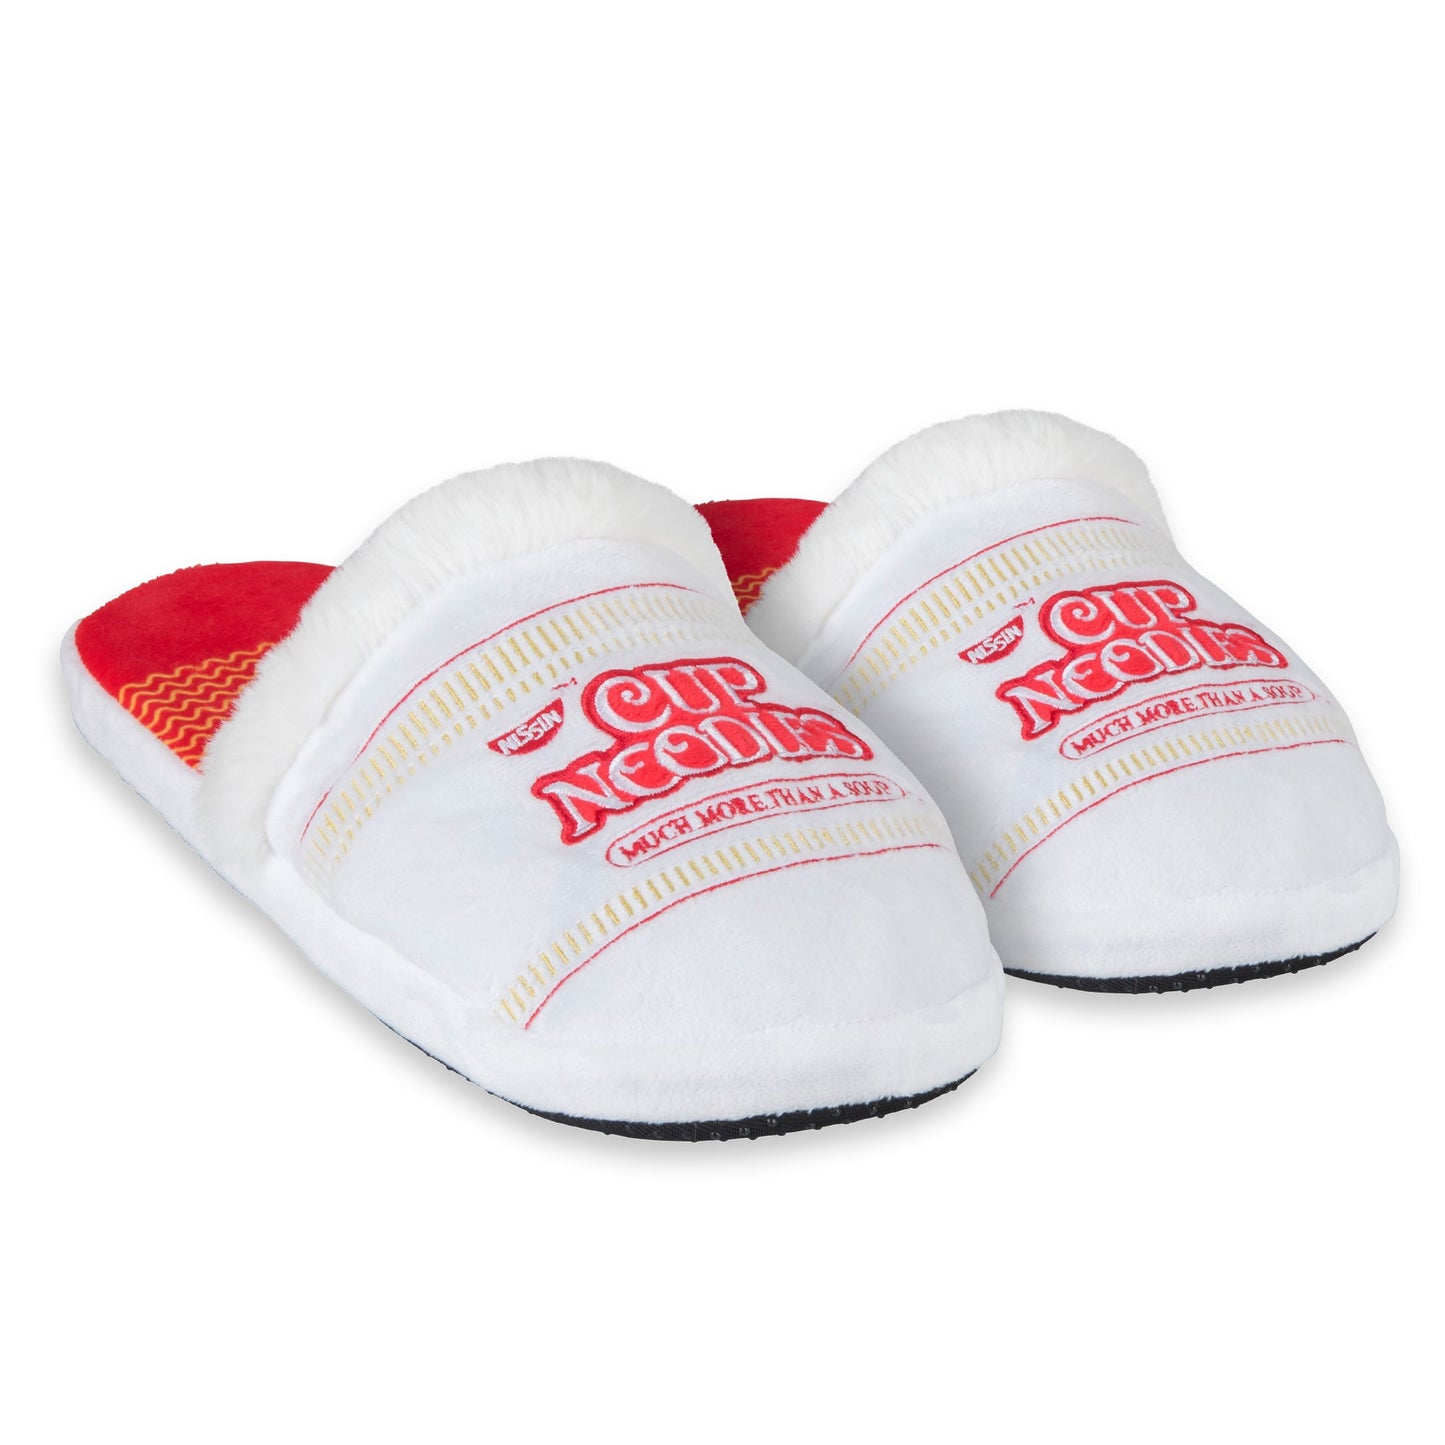 CUP NOODLES FUZZY - SLIPPERS (LARGE)